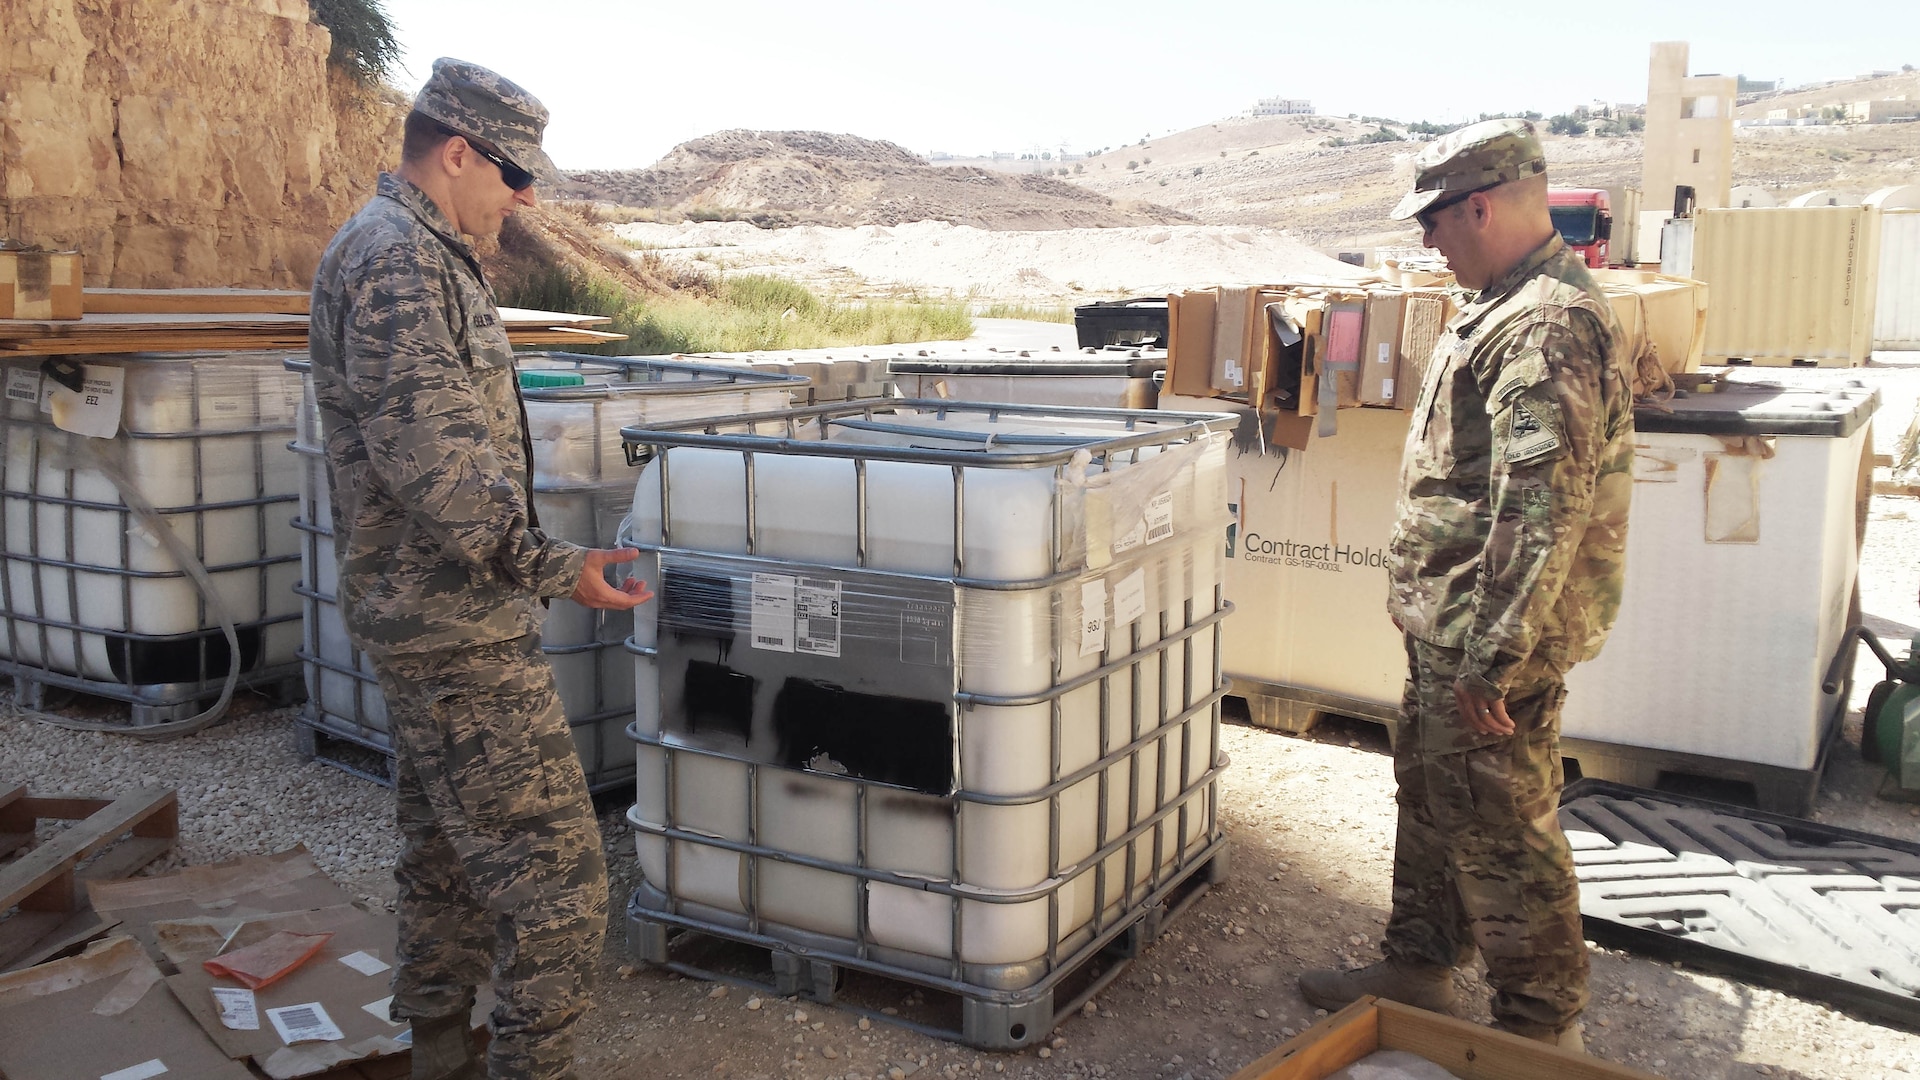 An Army and an Air Force engineer review a pallet of containers of DLA-provided ground-hardening paste, commonly called “rhino snot,” which is used to reduce dust. This shipment was used to coat a makeshift runway for an unmanned aerial system.